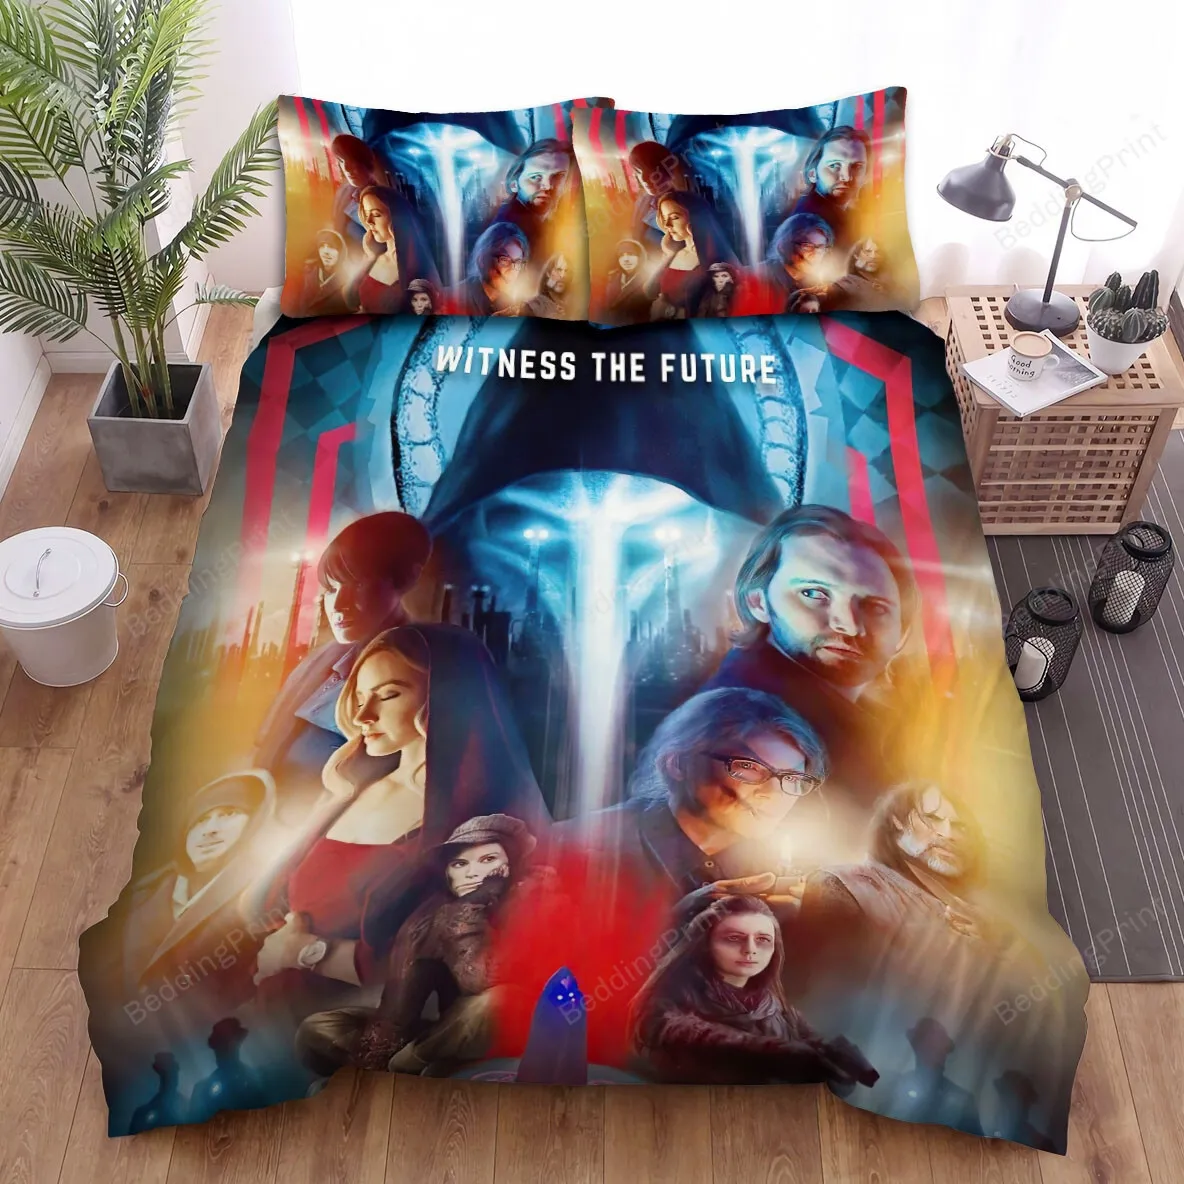 12 Monkeys (20152018) Witness The Future Movie Poster Bed Sheets Spread Comforter Duvet Cover Bedding Sets